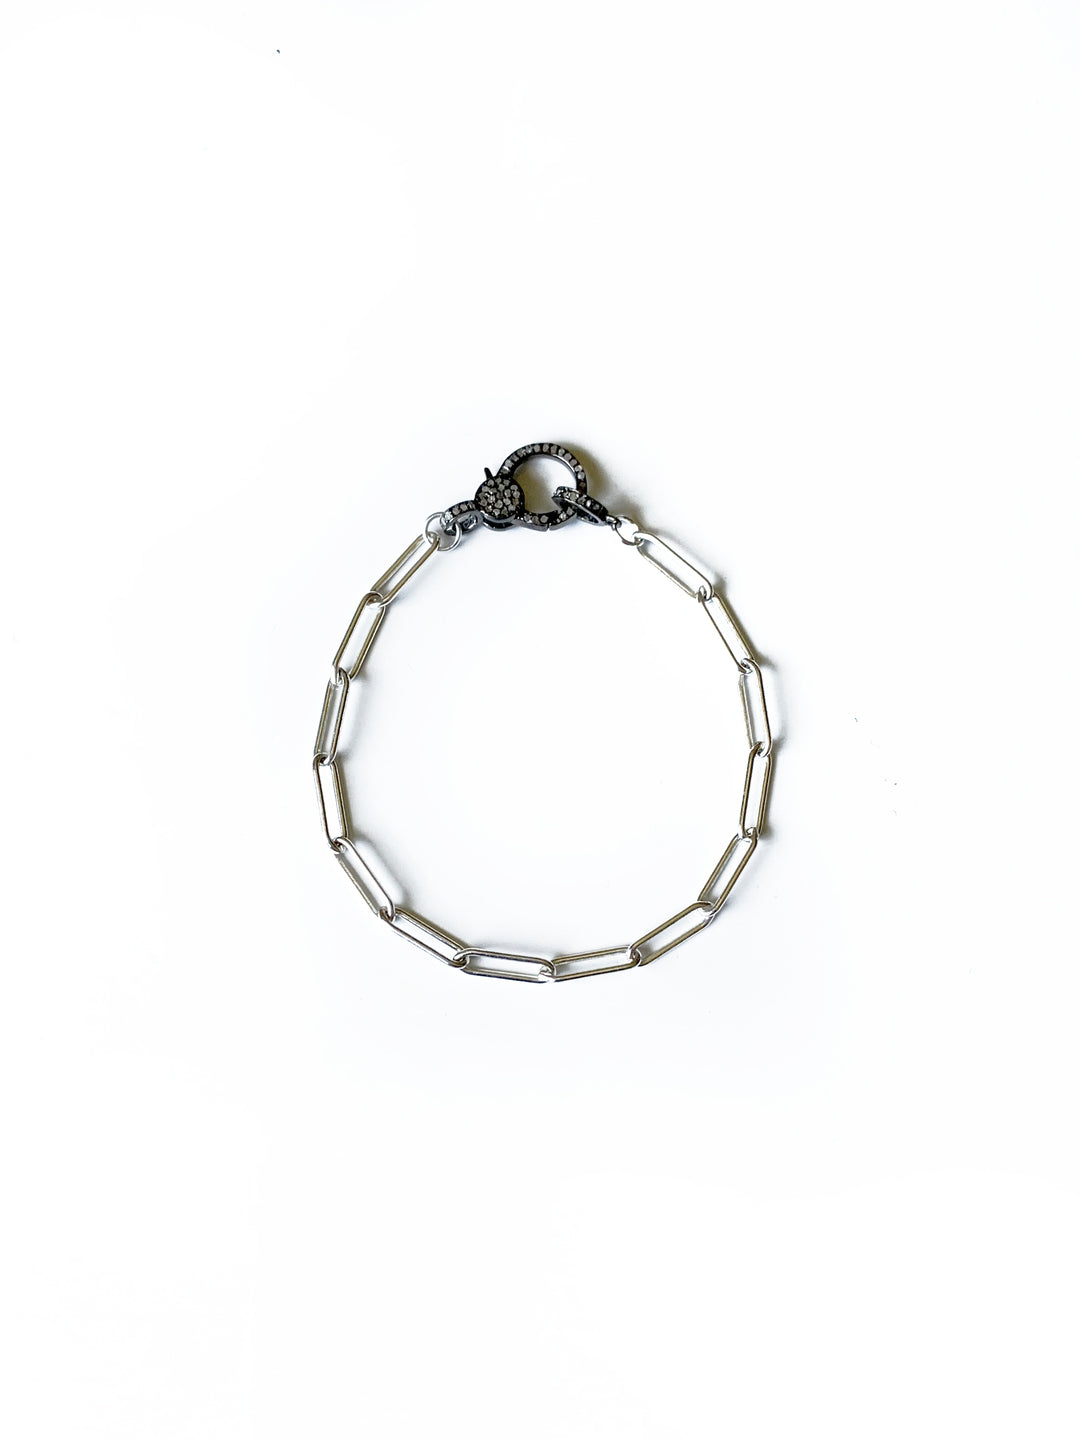 Silver Bracelet With Clasp - Kingfisher Road - Online Boutique